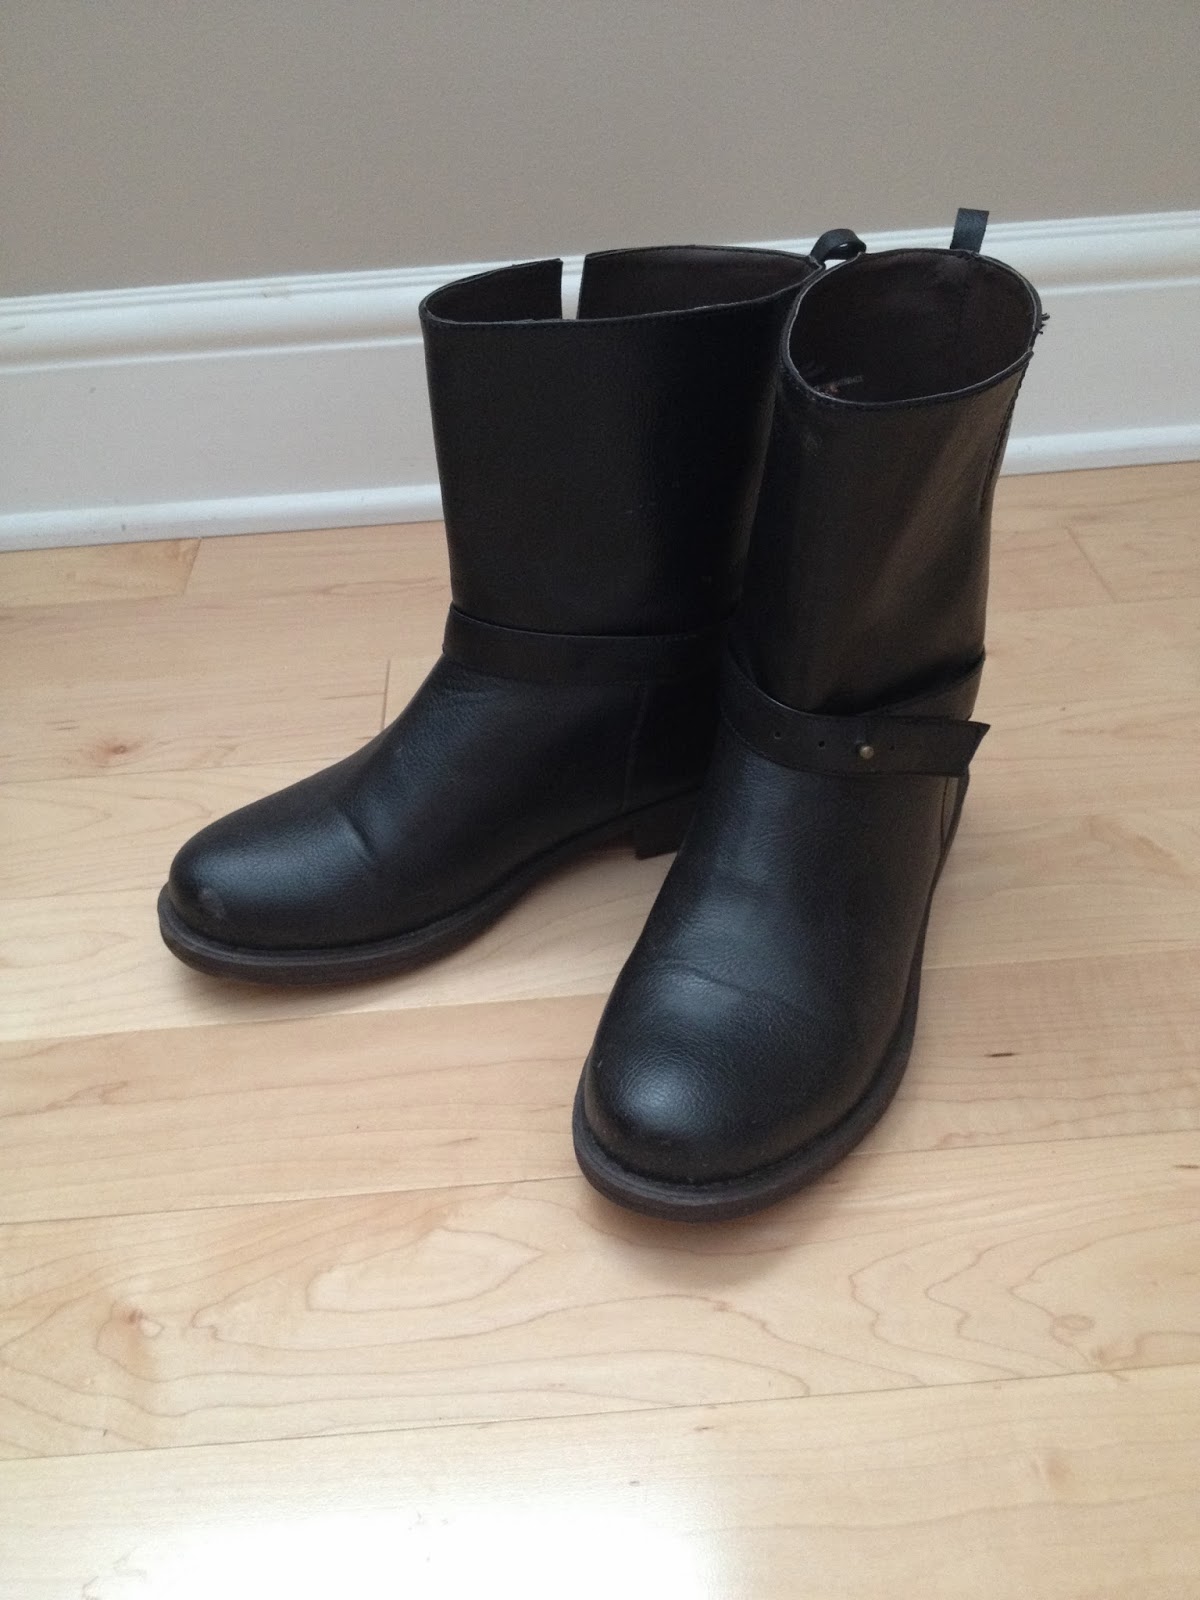 We Are Smart!: Poor Man's Boots…literally